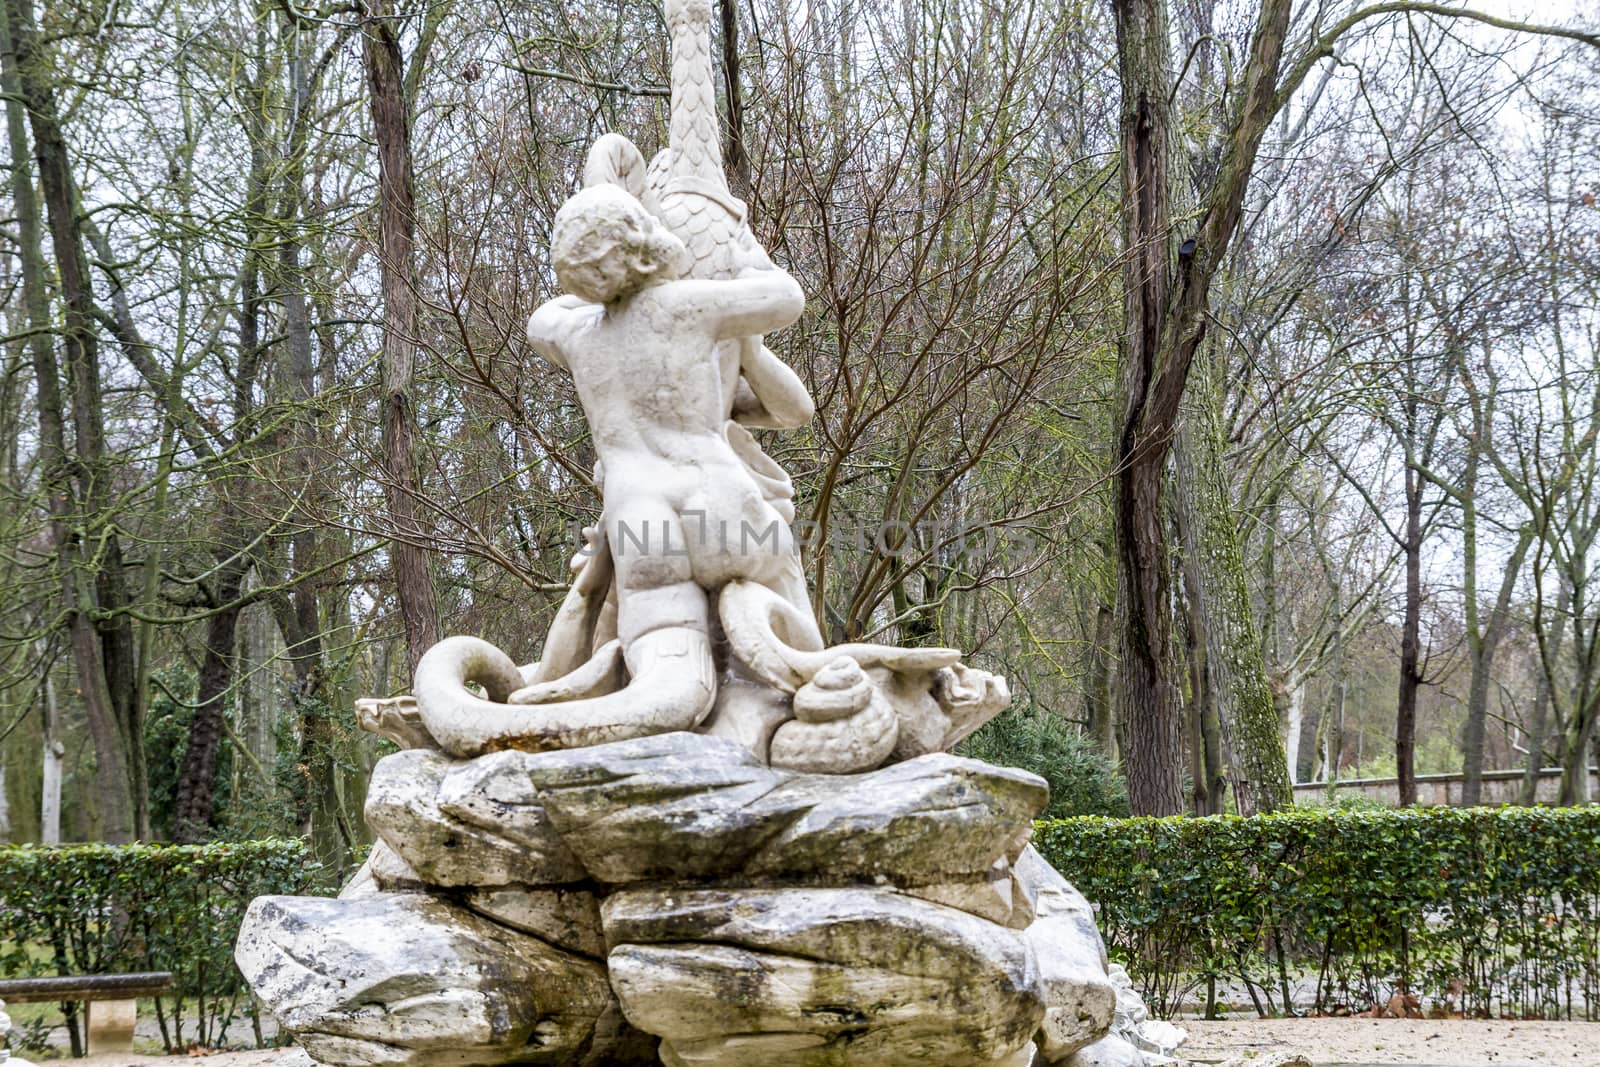 Ornamental fountains of the Palace of Aranjuez, Madrid, Spain